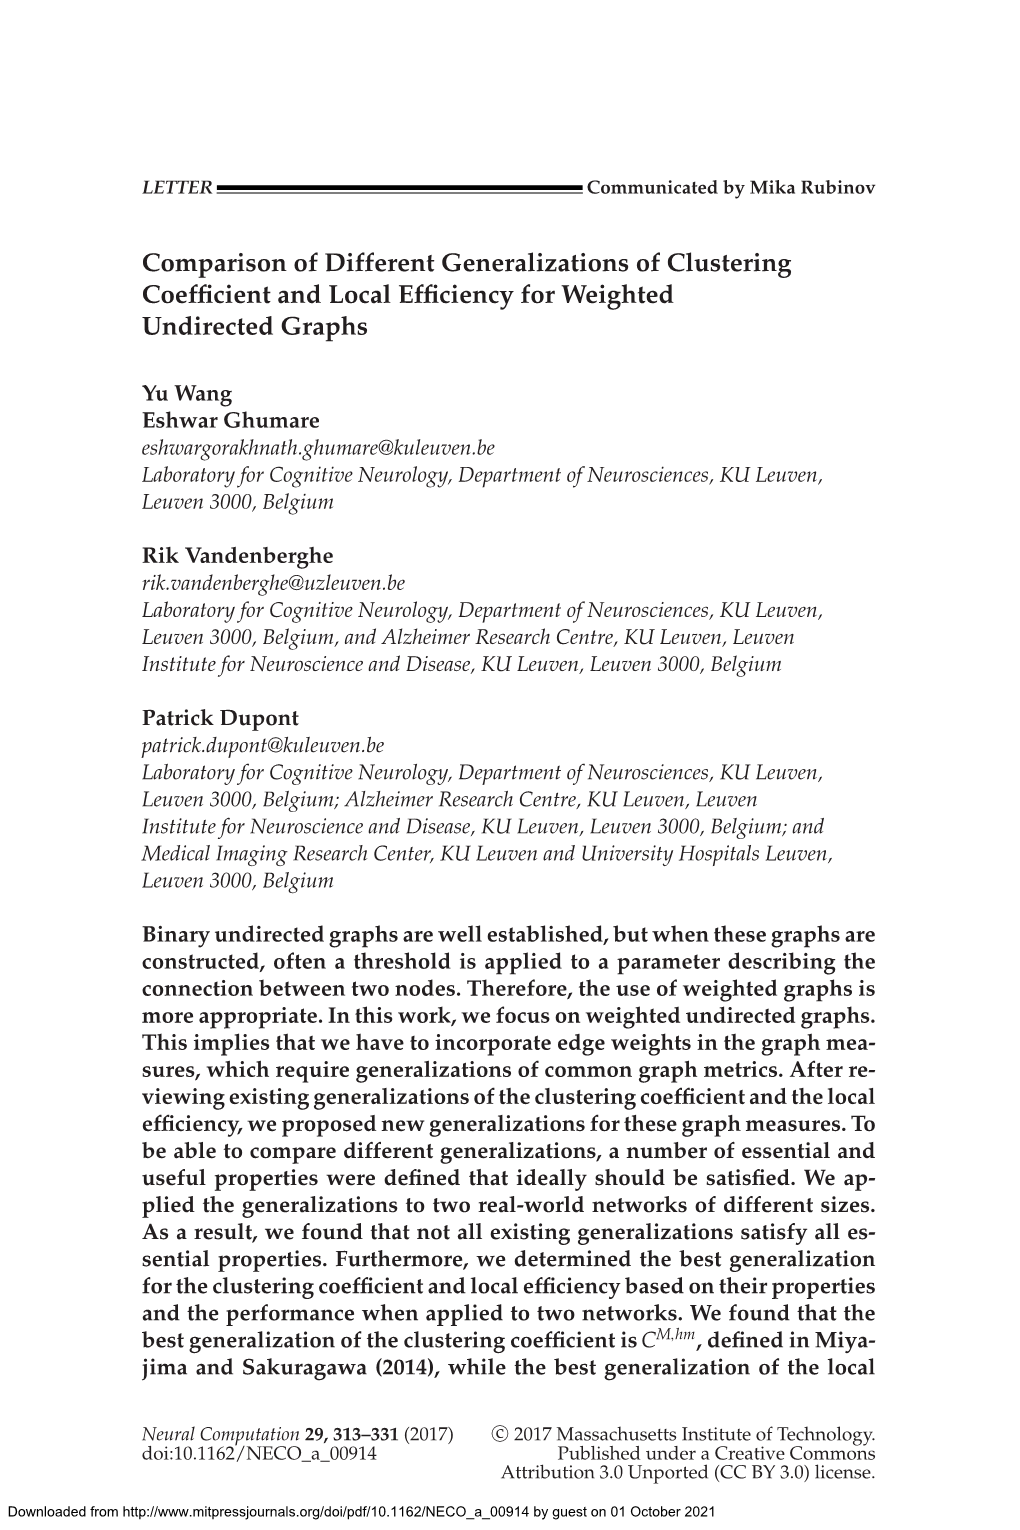 Comparison of Different Generalizations of Clustering Coefﬁcient and Local Efﬁciency for Weighted Undirected Graphs